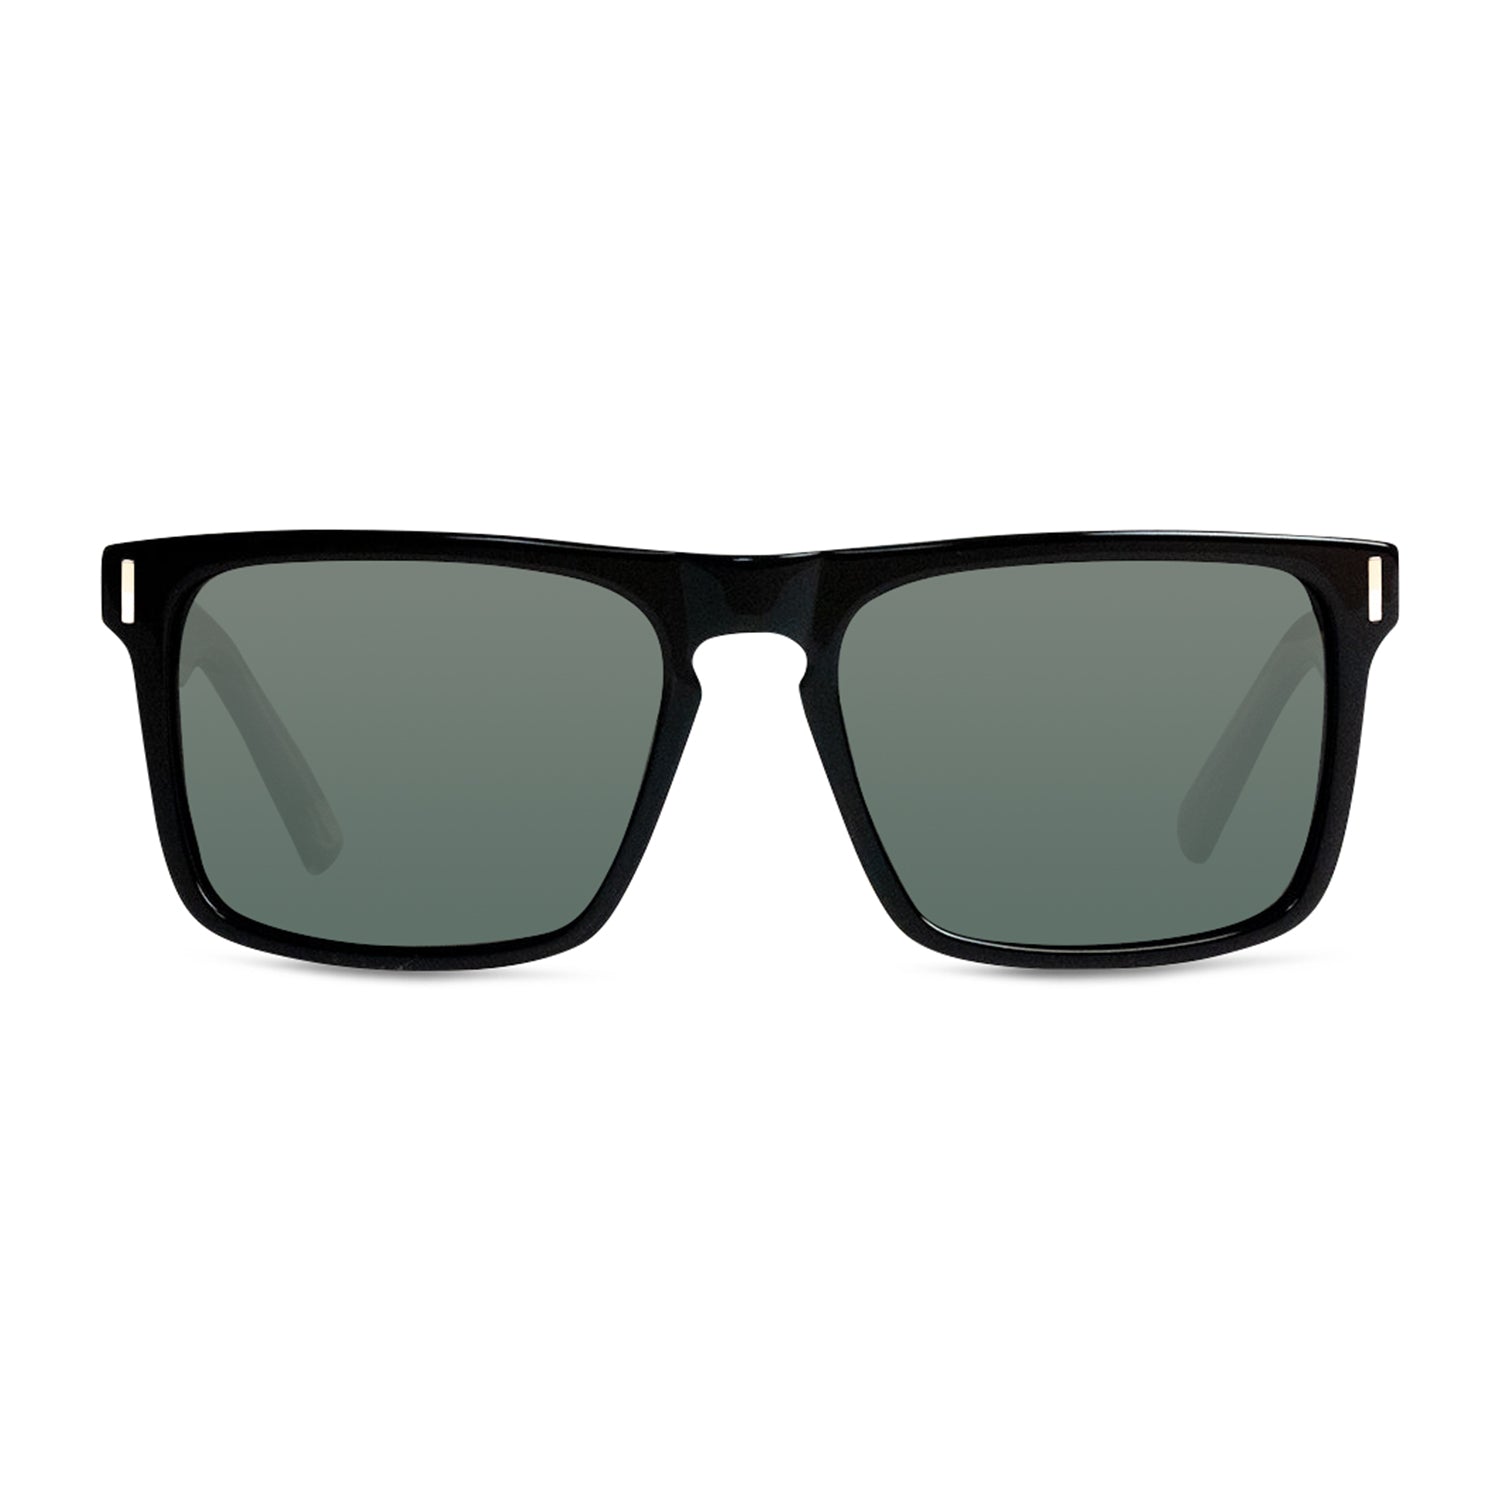 #color_Deep Black / ColorBoost Polarized Gray Green Lens